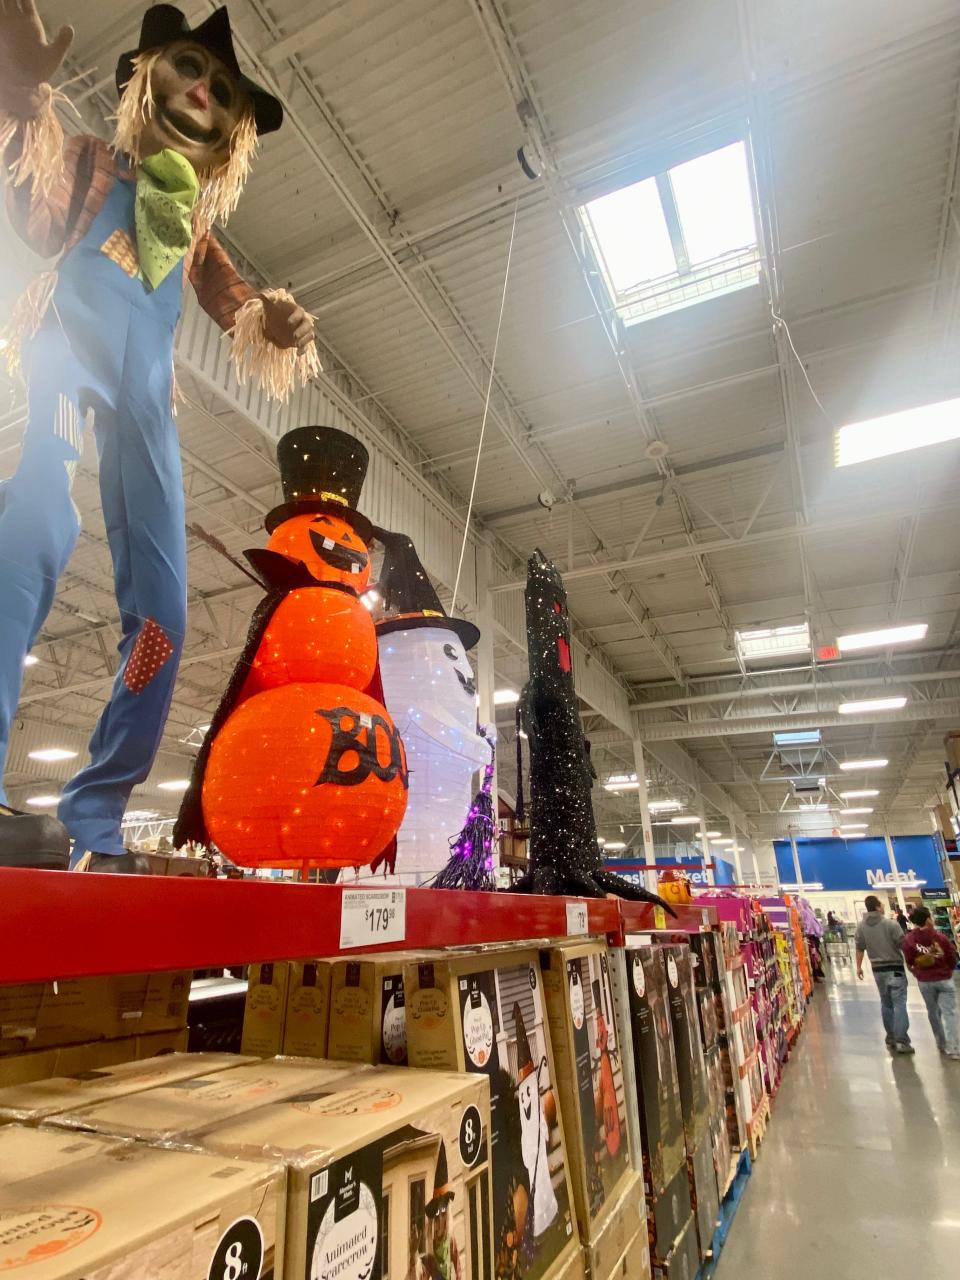 Halloween decor and candy aisle in Sam's Club.